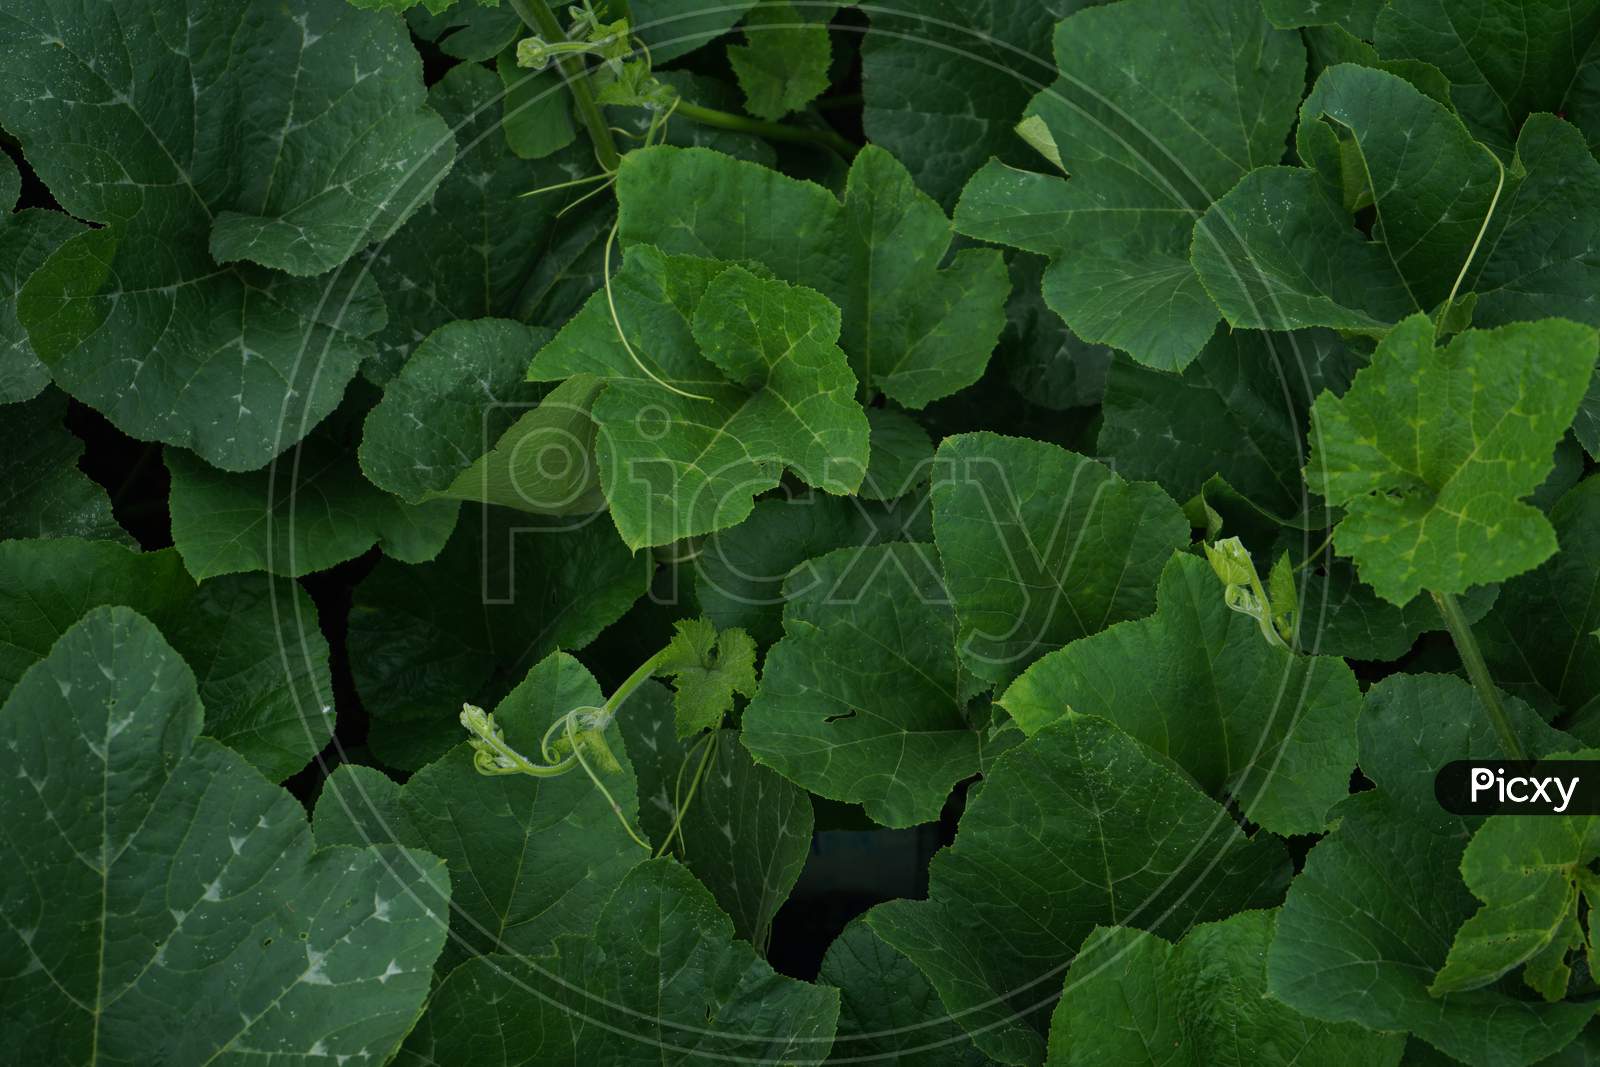 Top View Of The Field Of Bottle Gourd, Leaves Of Bottle Gourd, Green Leaves Background And Texture.